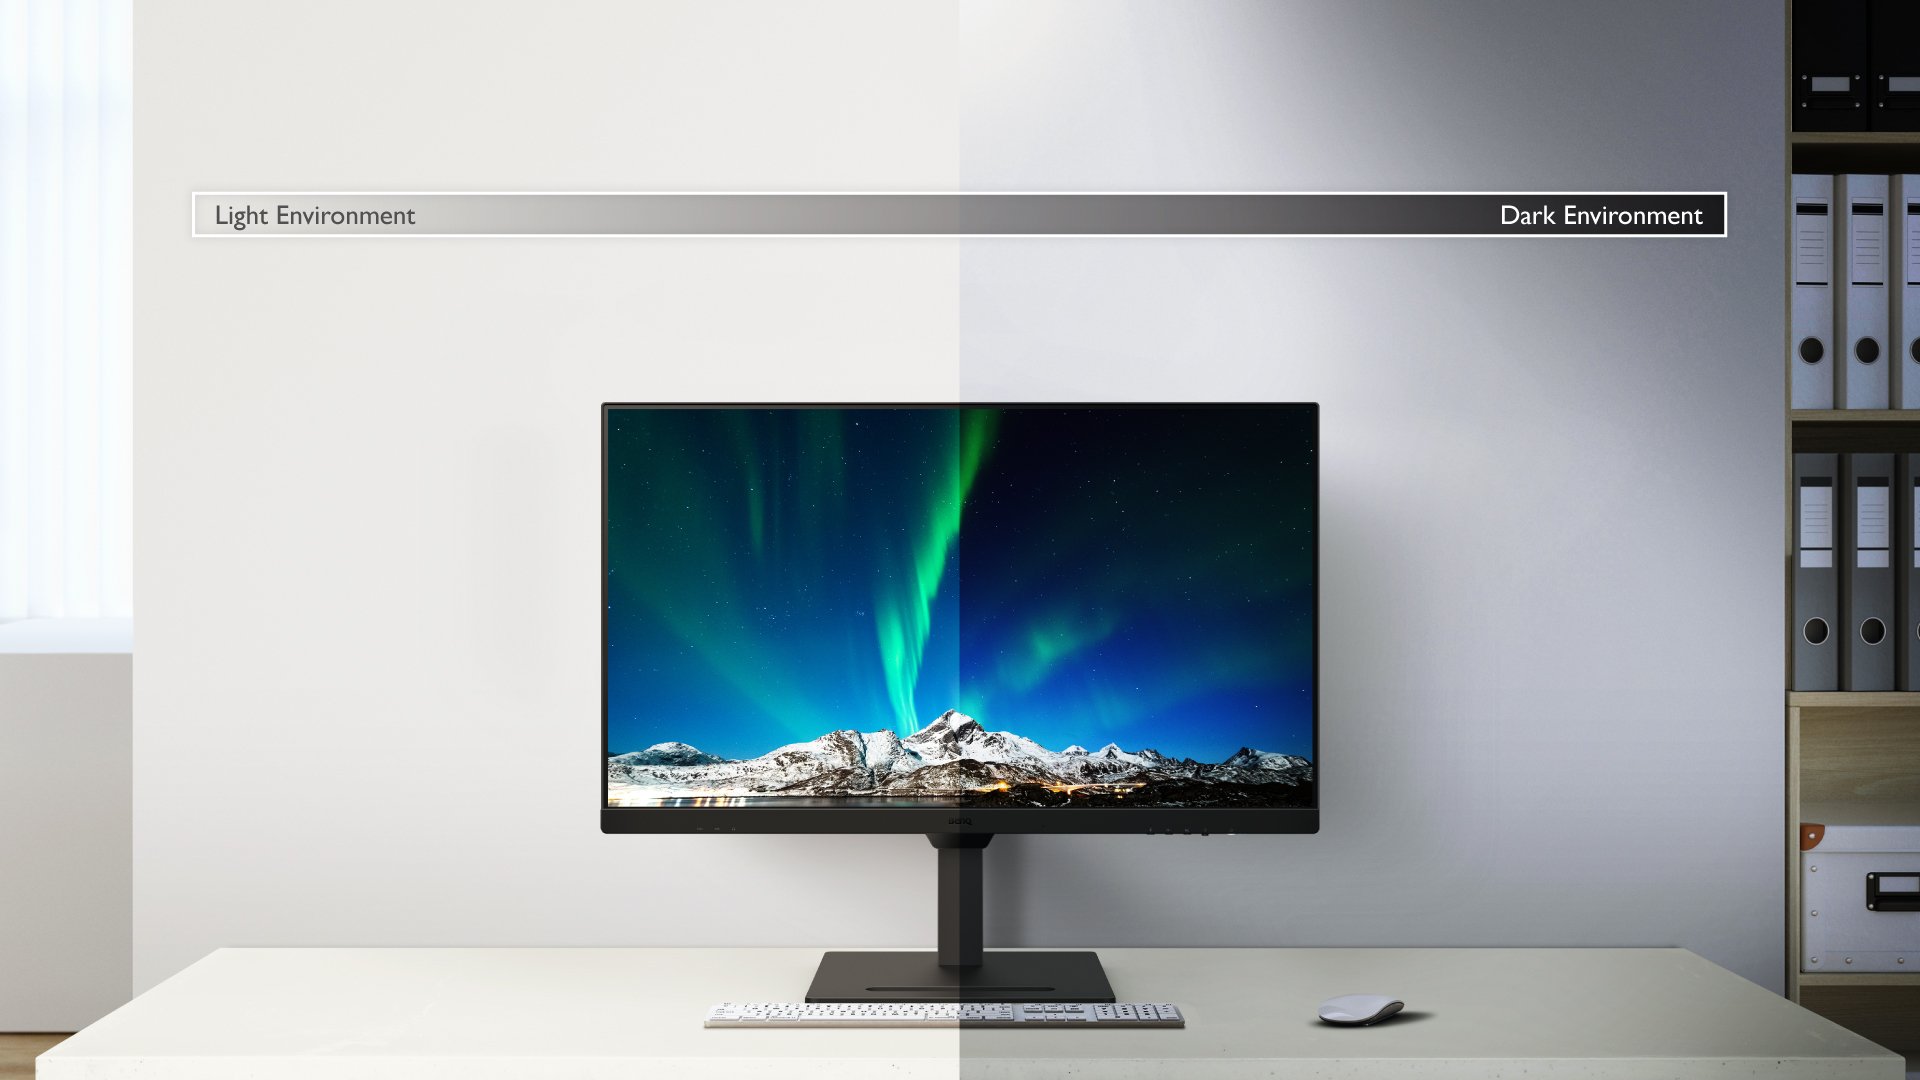 BenQ BL3290QT Brightness Intelligence actively adjusts screen brightness for comfortable viewing experiences and Brightness Intellignece Gen.2 allows customizable brightness.